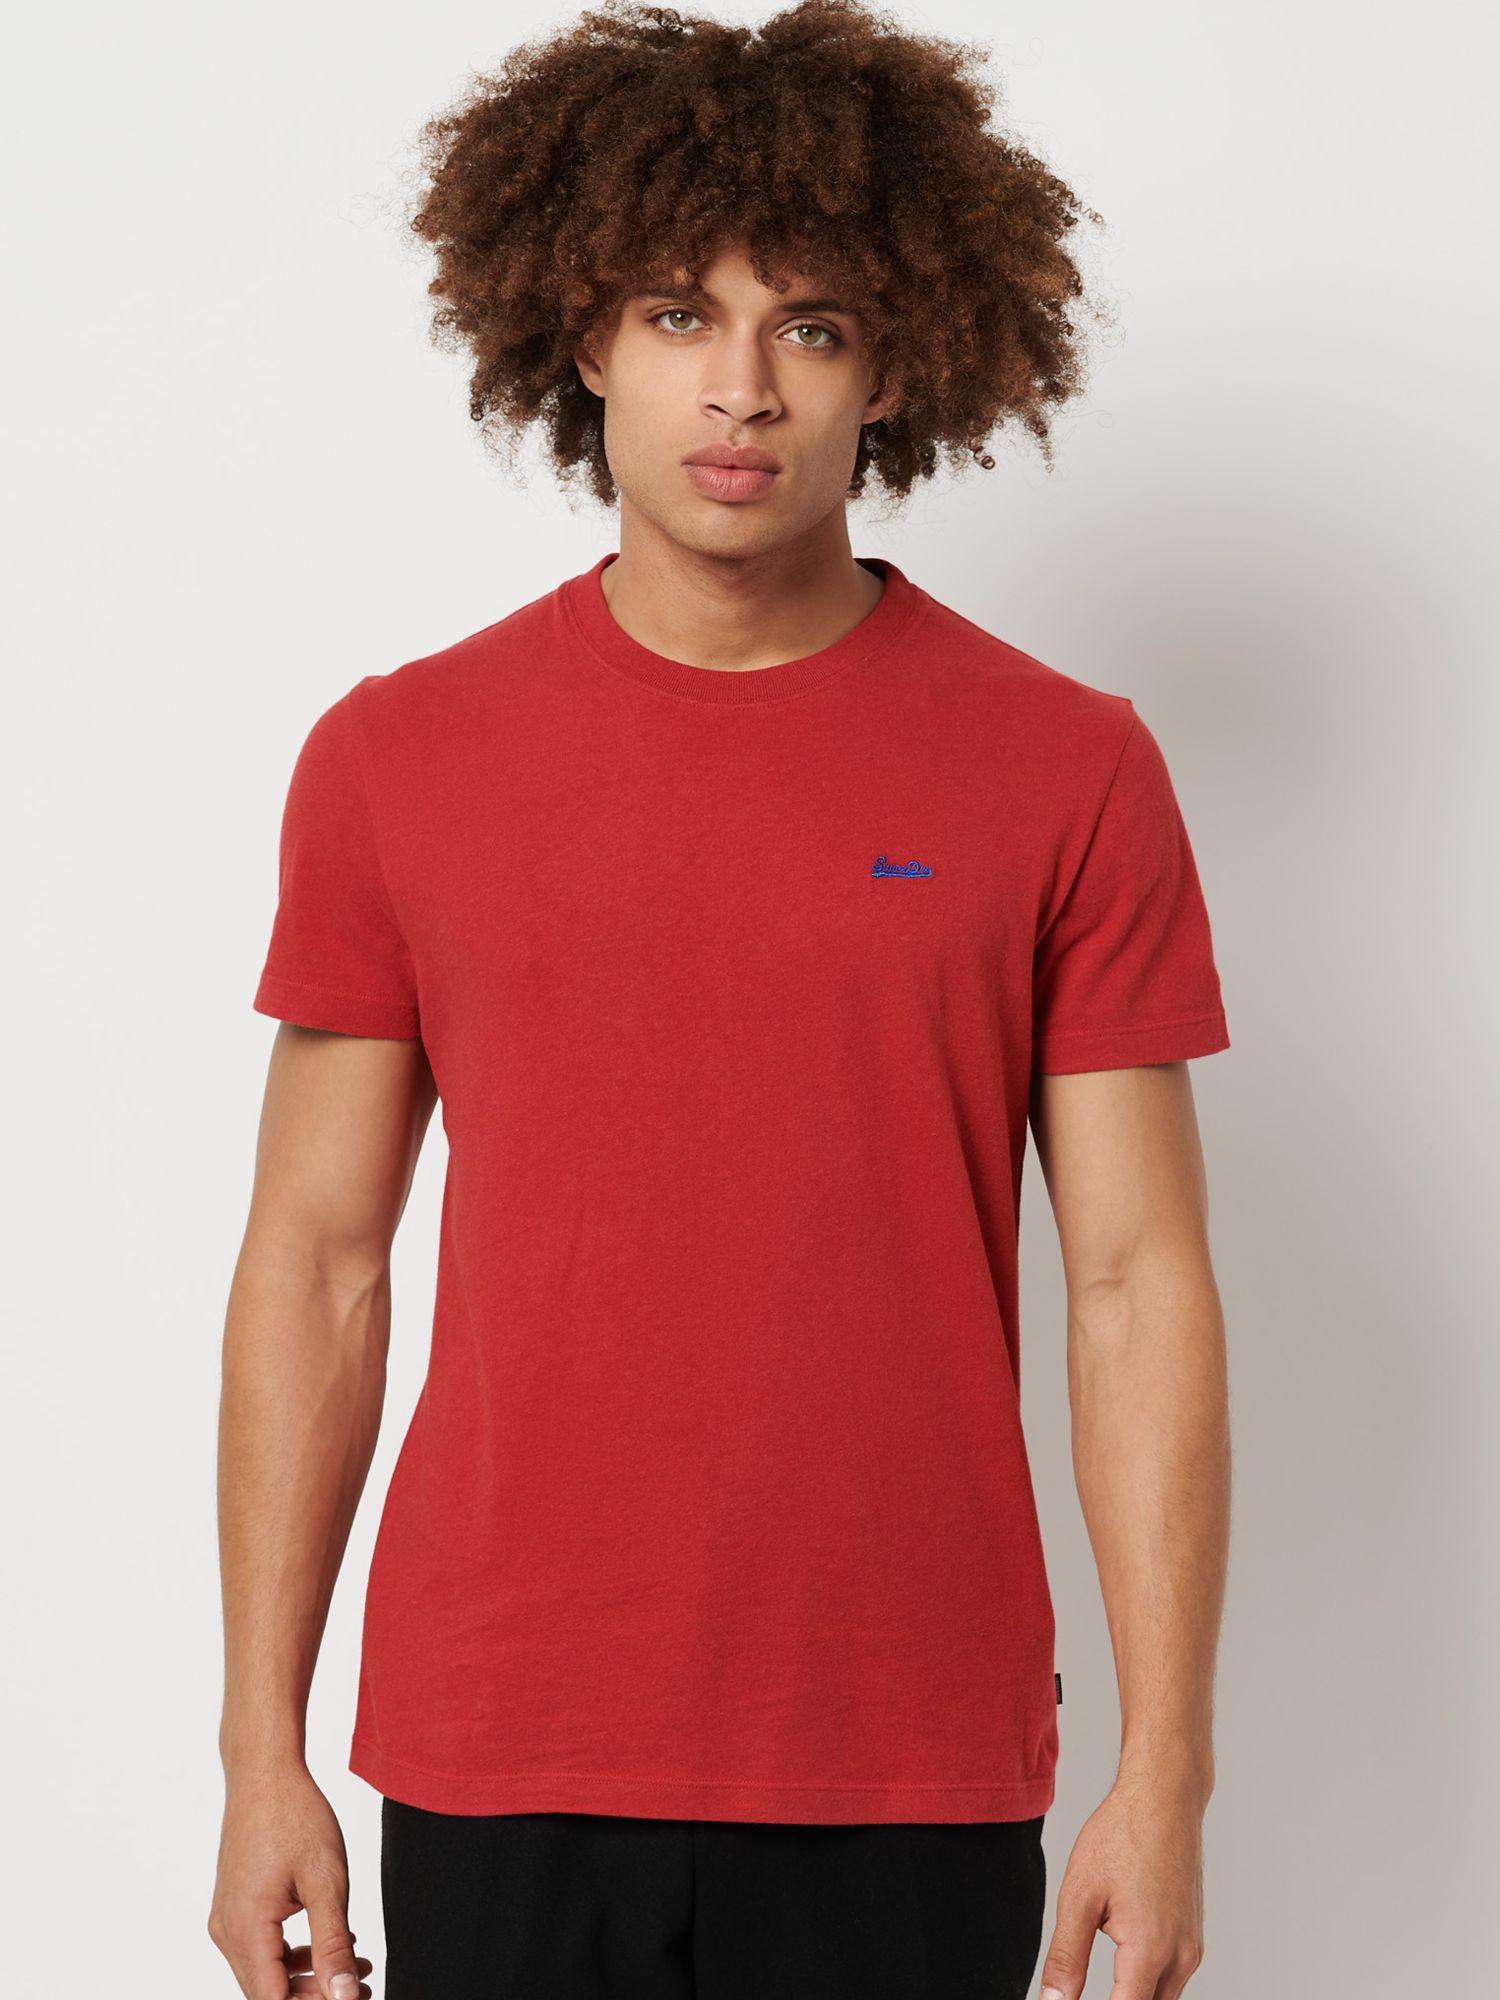 Superdry Organic Cotton Vintage Embroidered T-Shirt, Hike Red Marl, XS